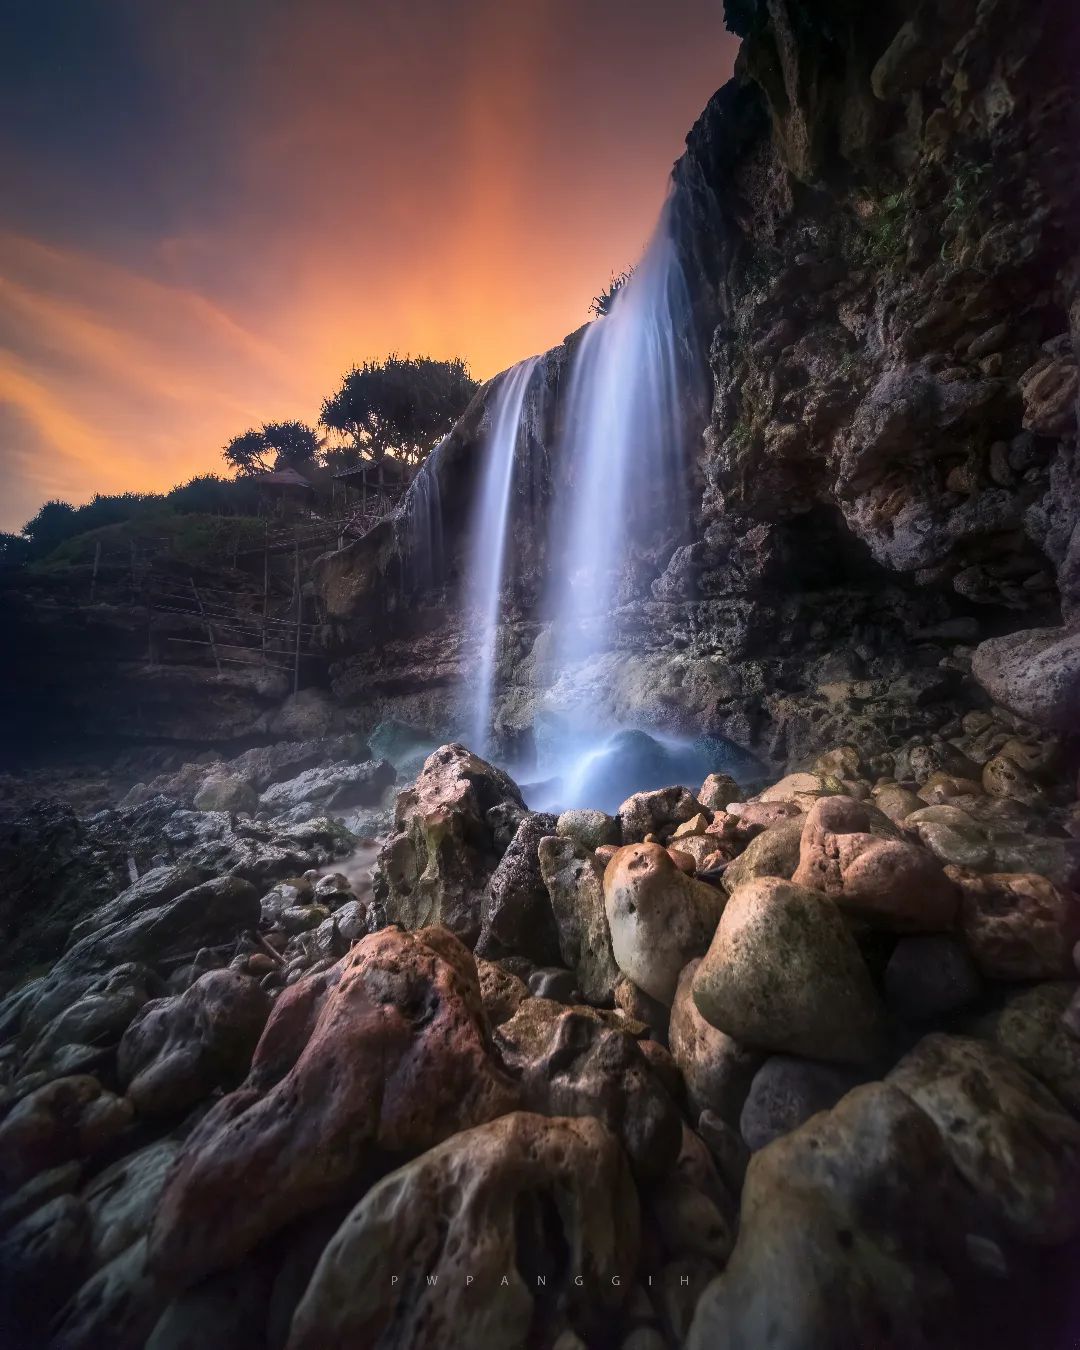 A waterfall at Jogan Beach flowing over rocks with a colorful sunset sky in the background.